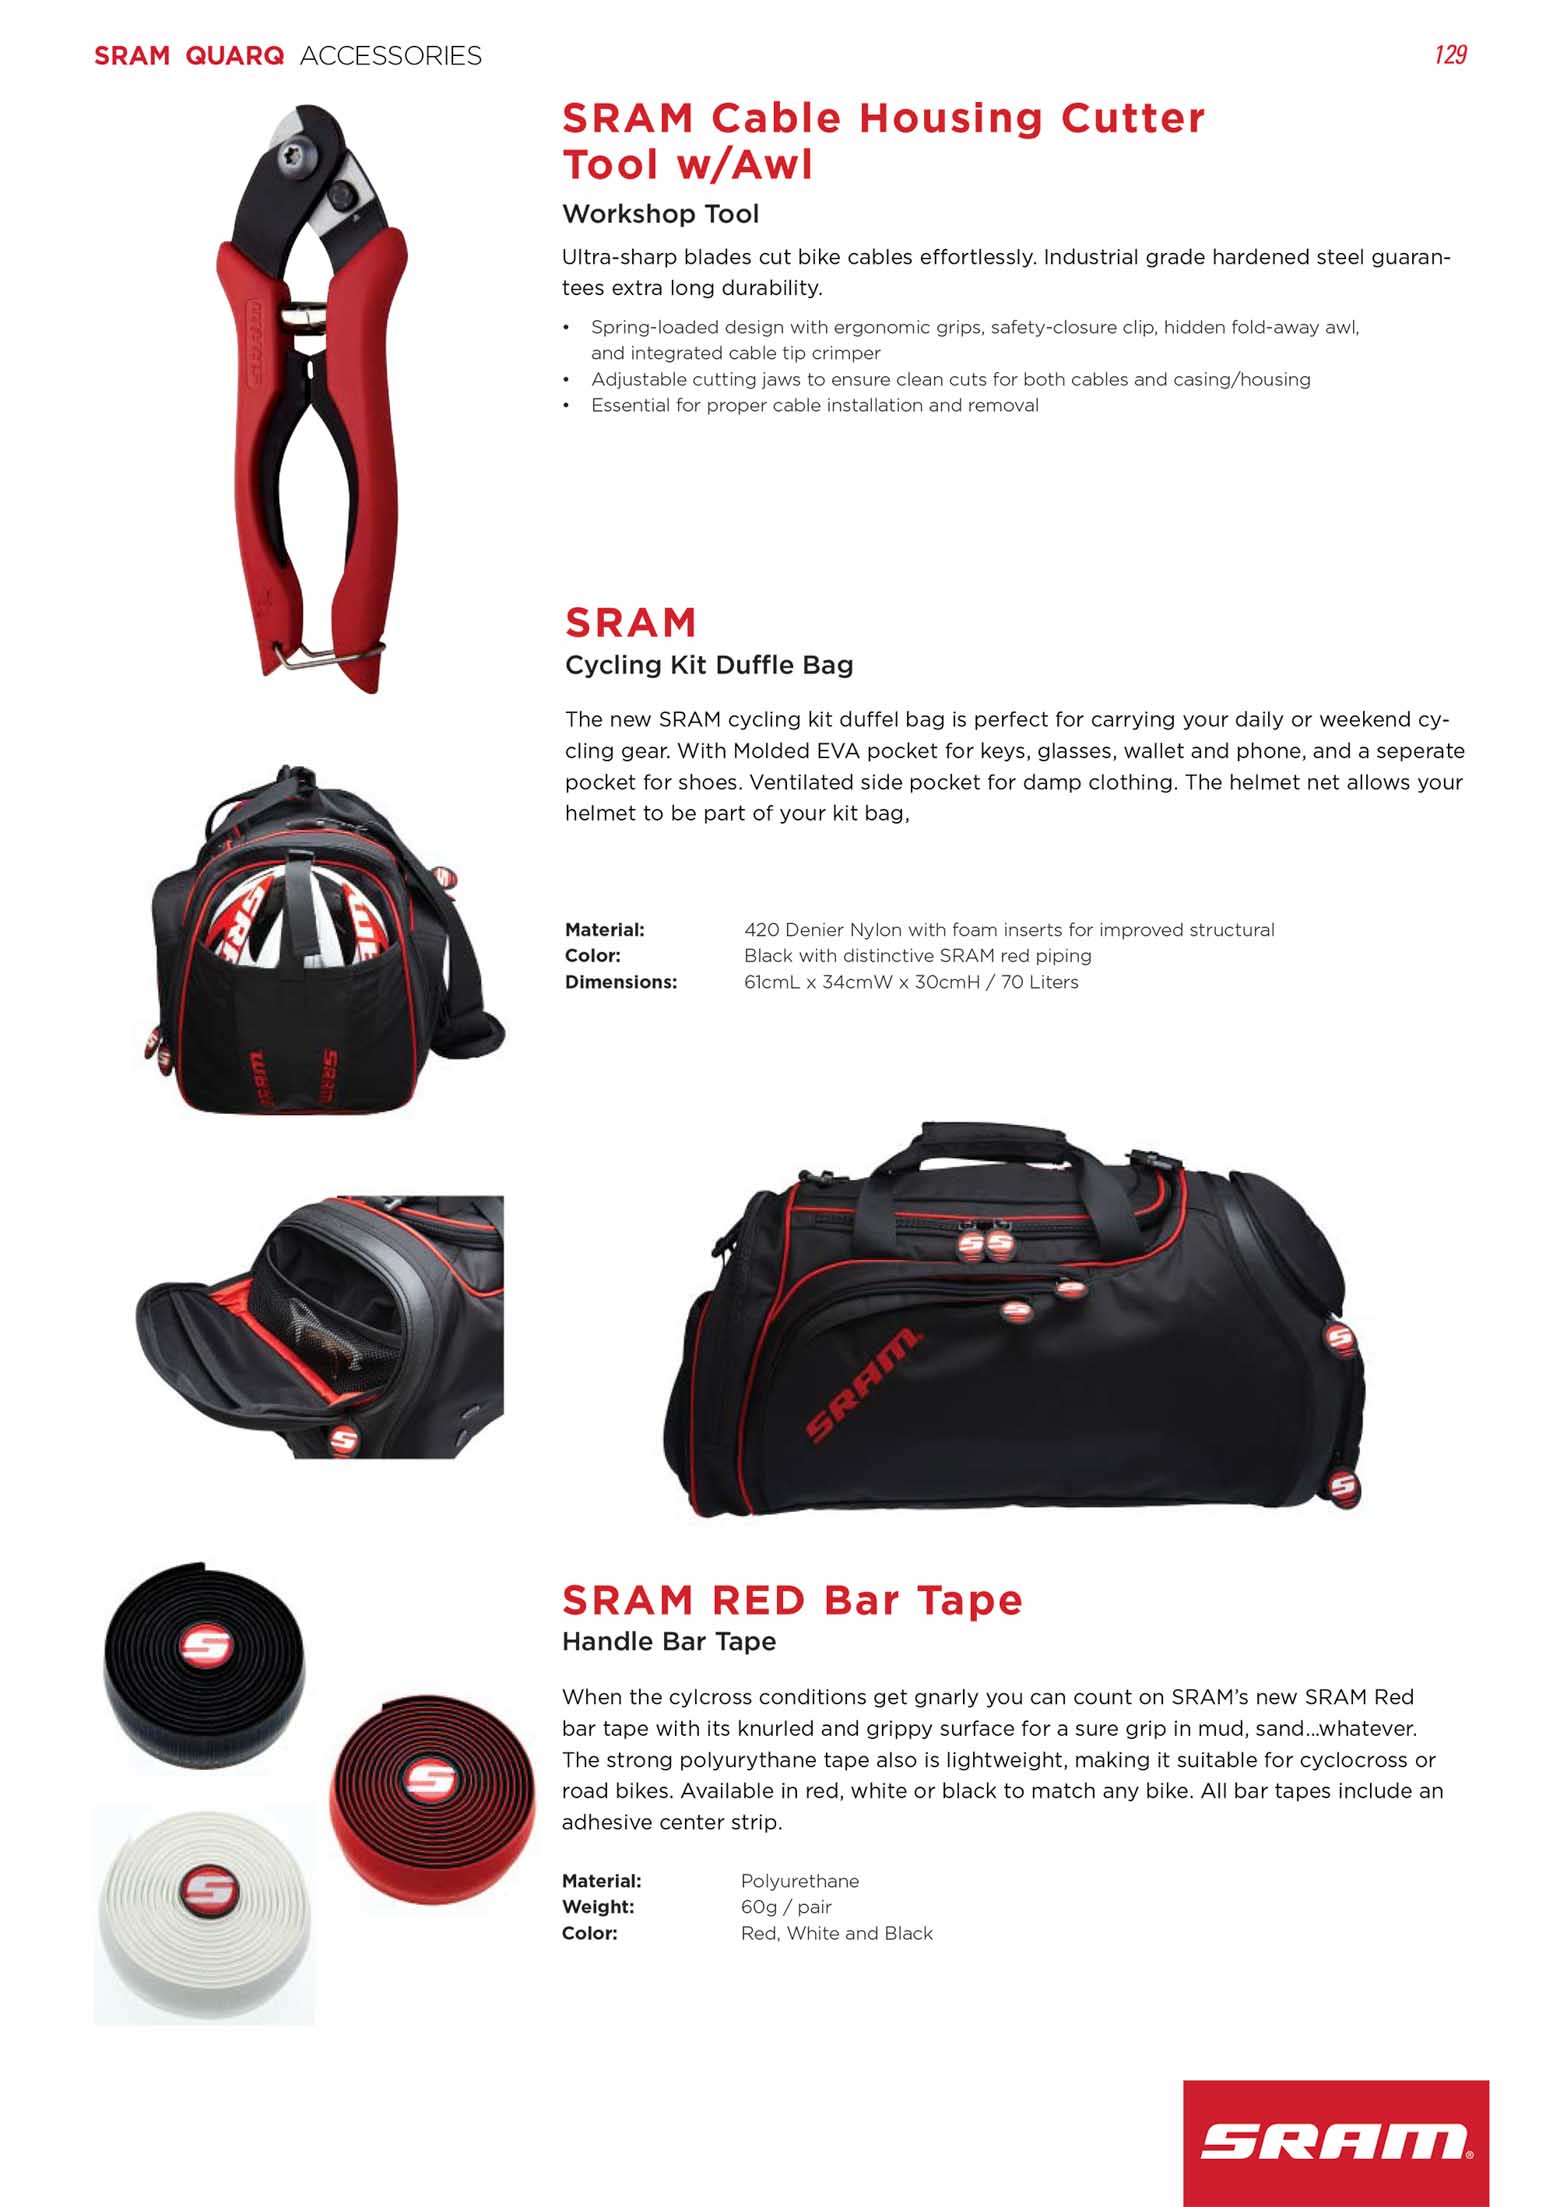 SRAM 2014 Product Collections page 129 main image